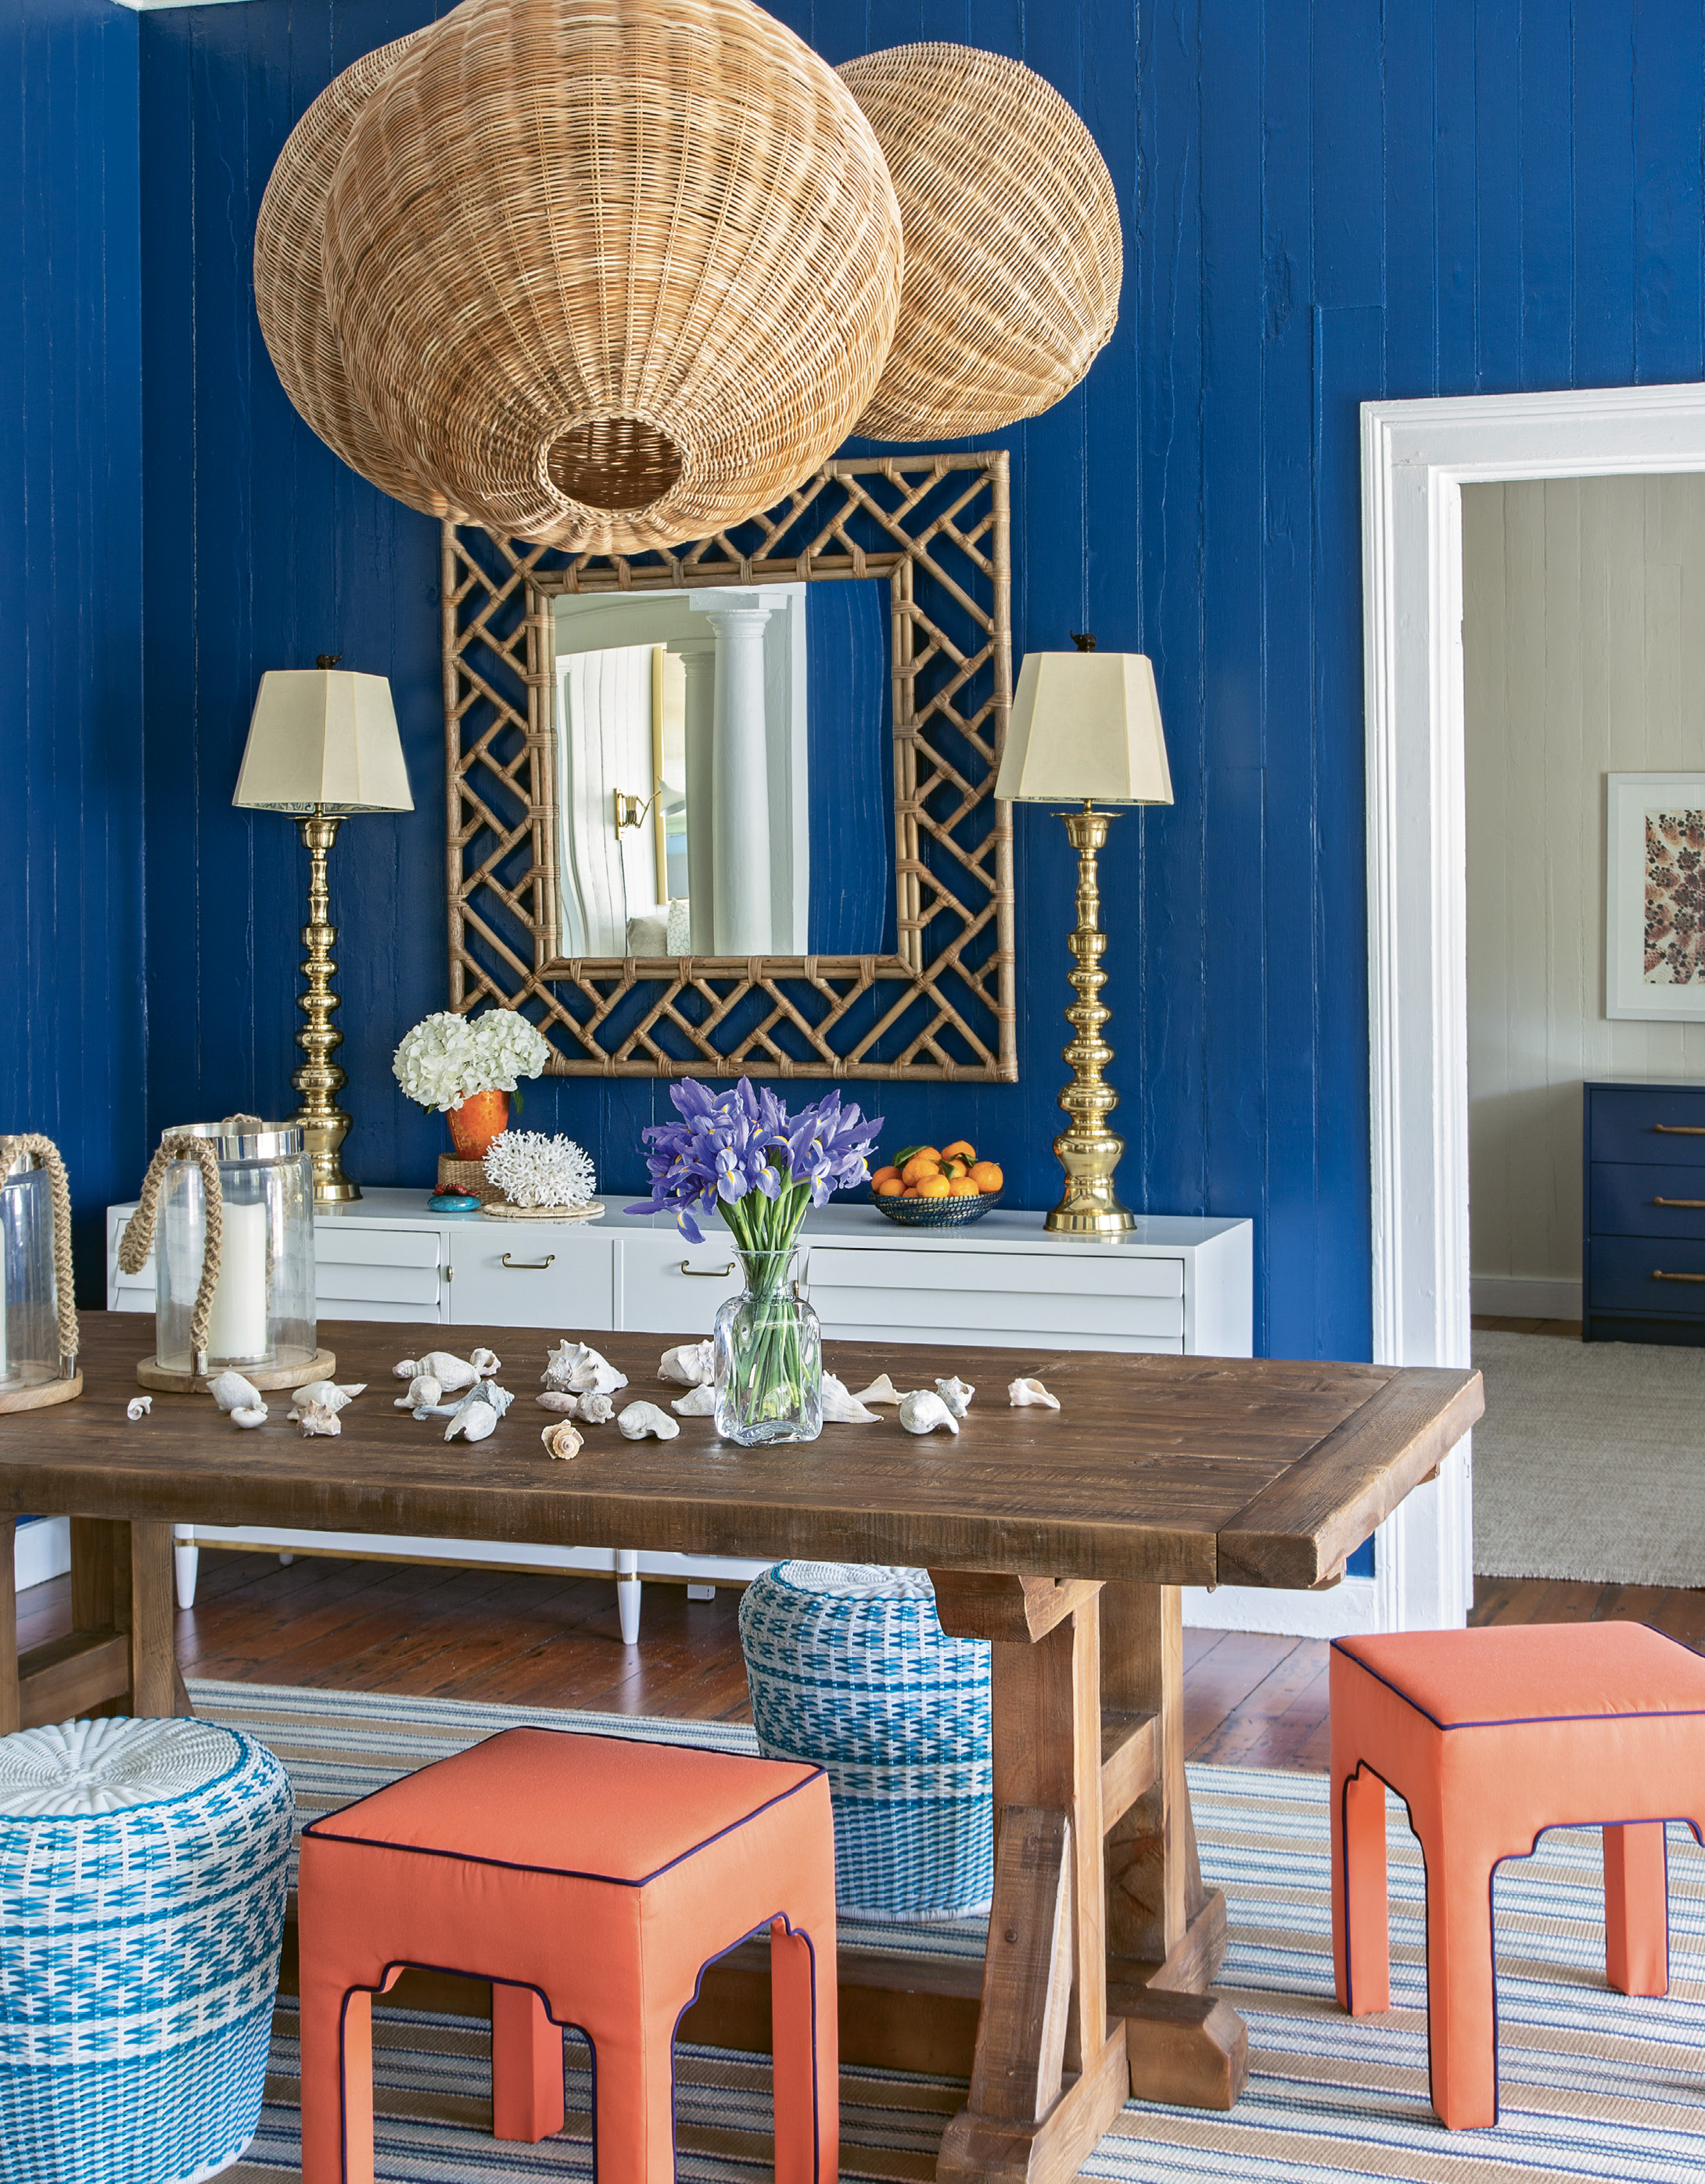 Woven Whimsy: A custom-designed cluster of wicker pendant lights from Serena and Lily dominates the reimagined entryway/dining room. A vintage cabinet from Indigo Market provides storage space as well as a showcase for two striking lamps from Chairish and mirror from Candelabra.